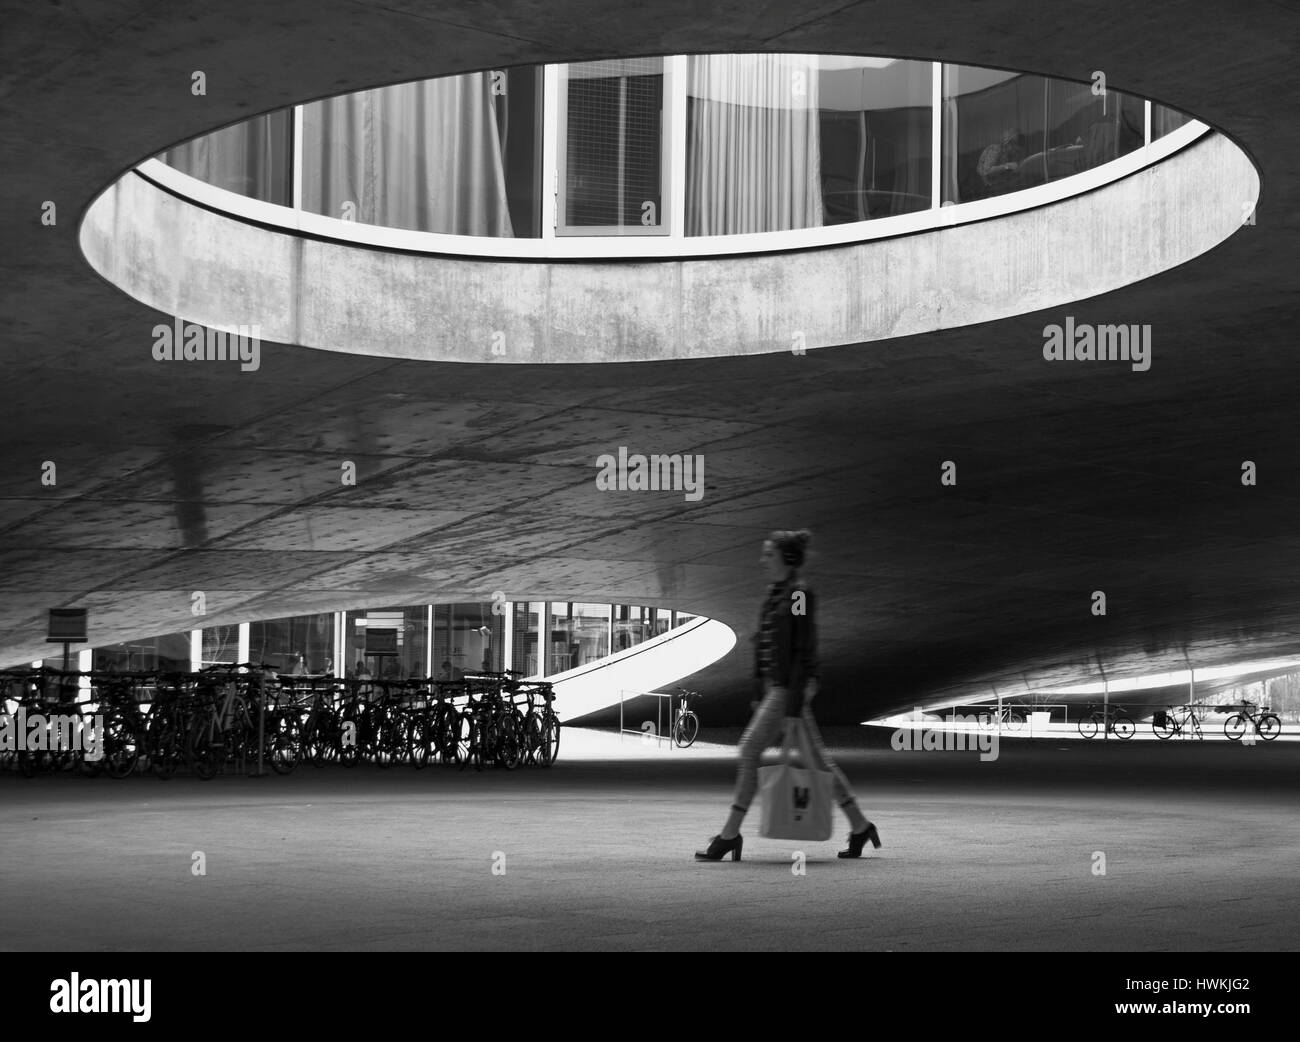 Under the Rolex learning center, Lausanne, Switzerland Stock Photo - Alamy